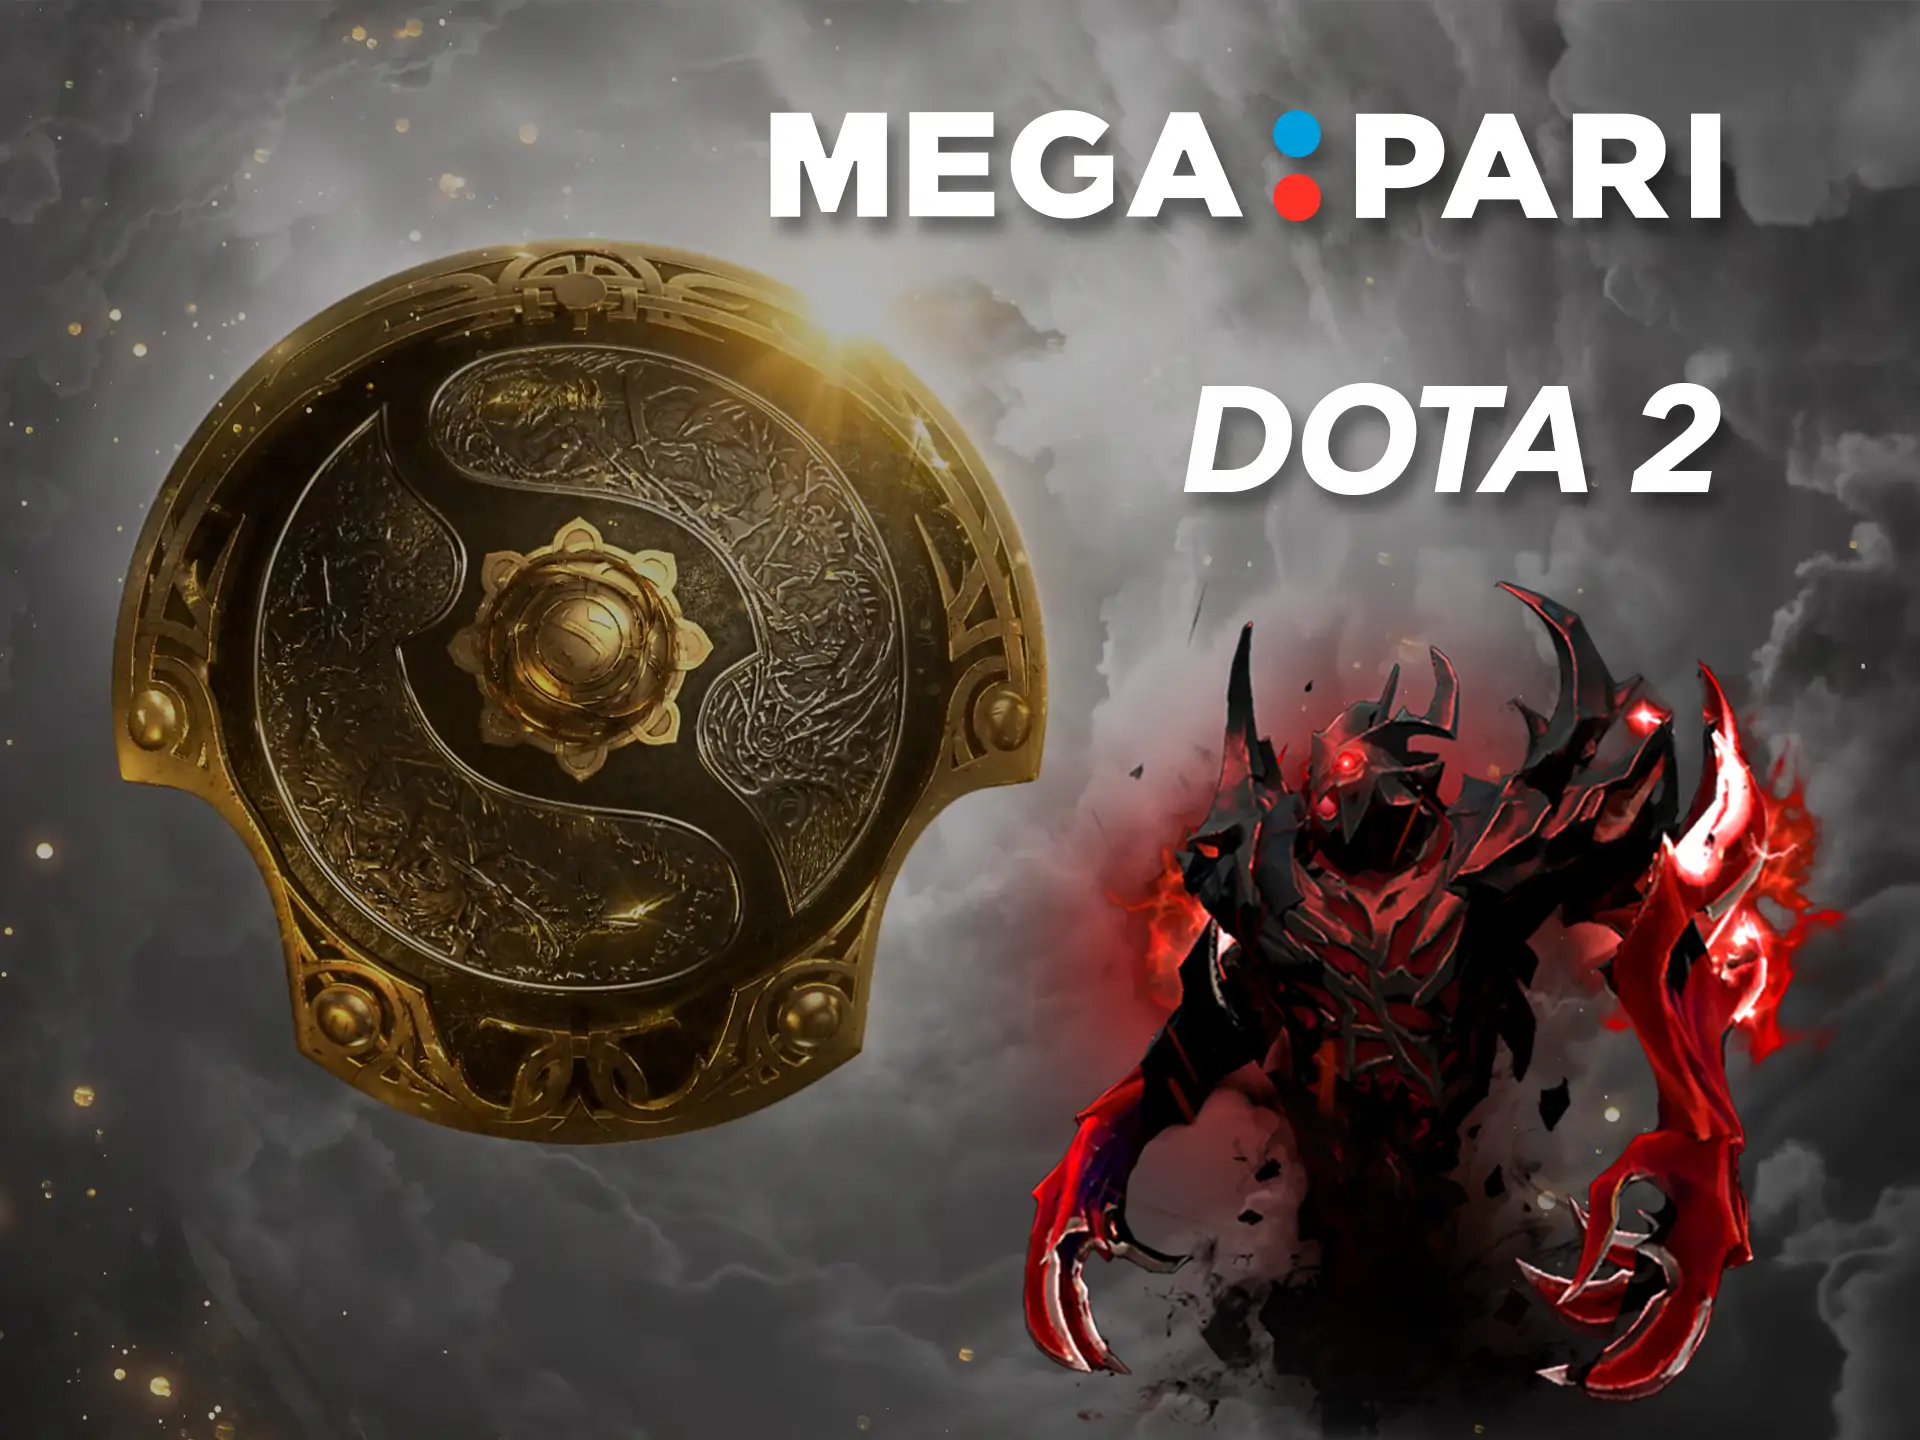 Bet on your favorite cyber sports team in Dota2.